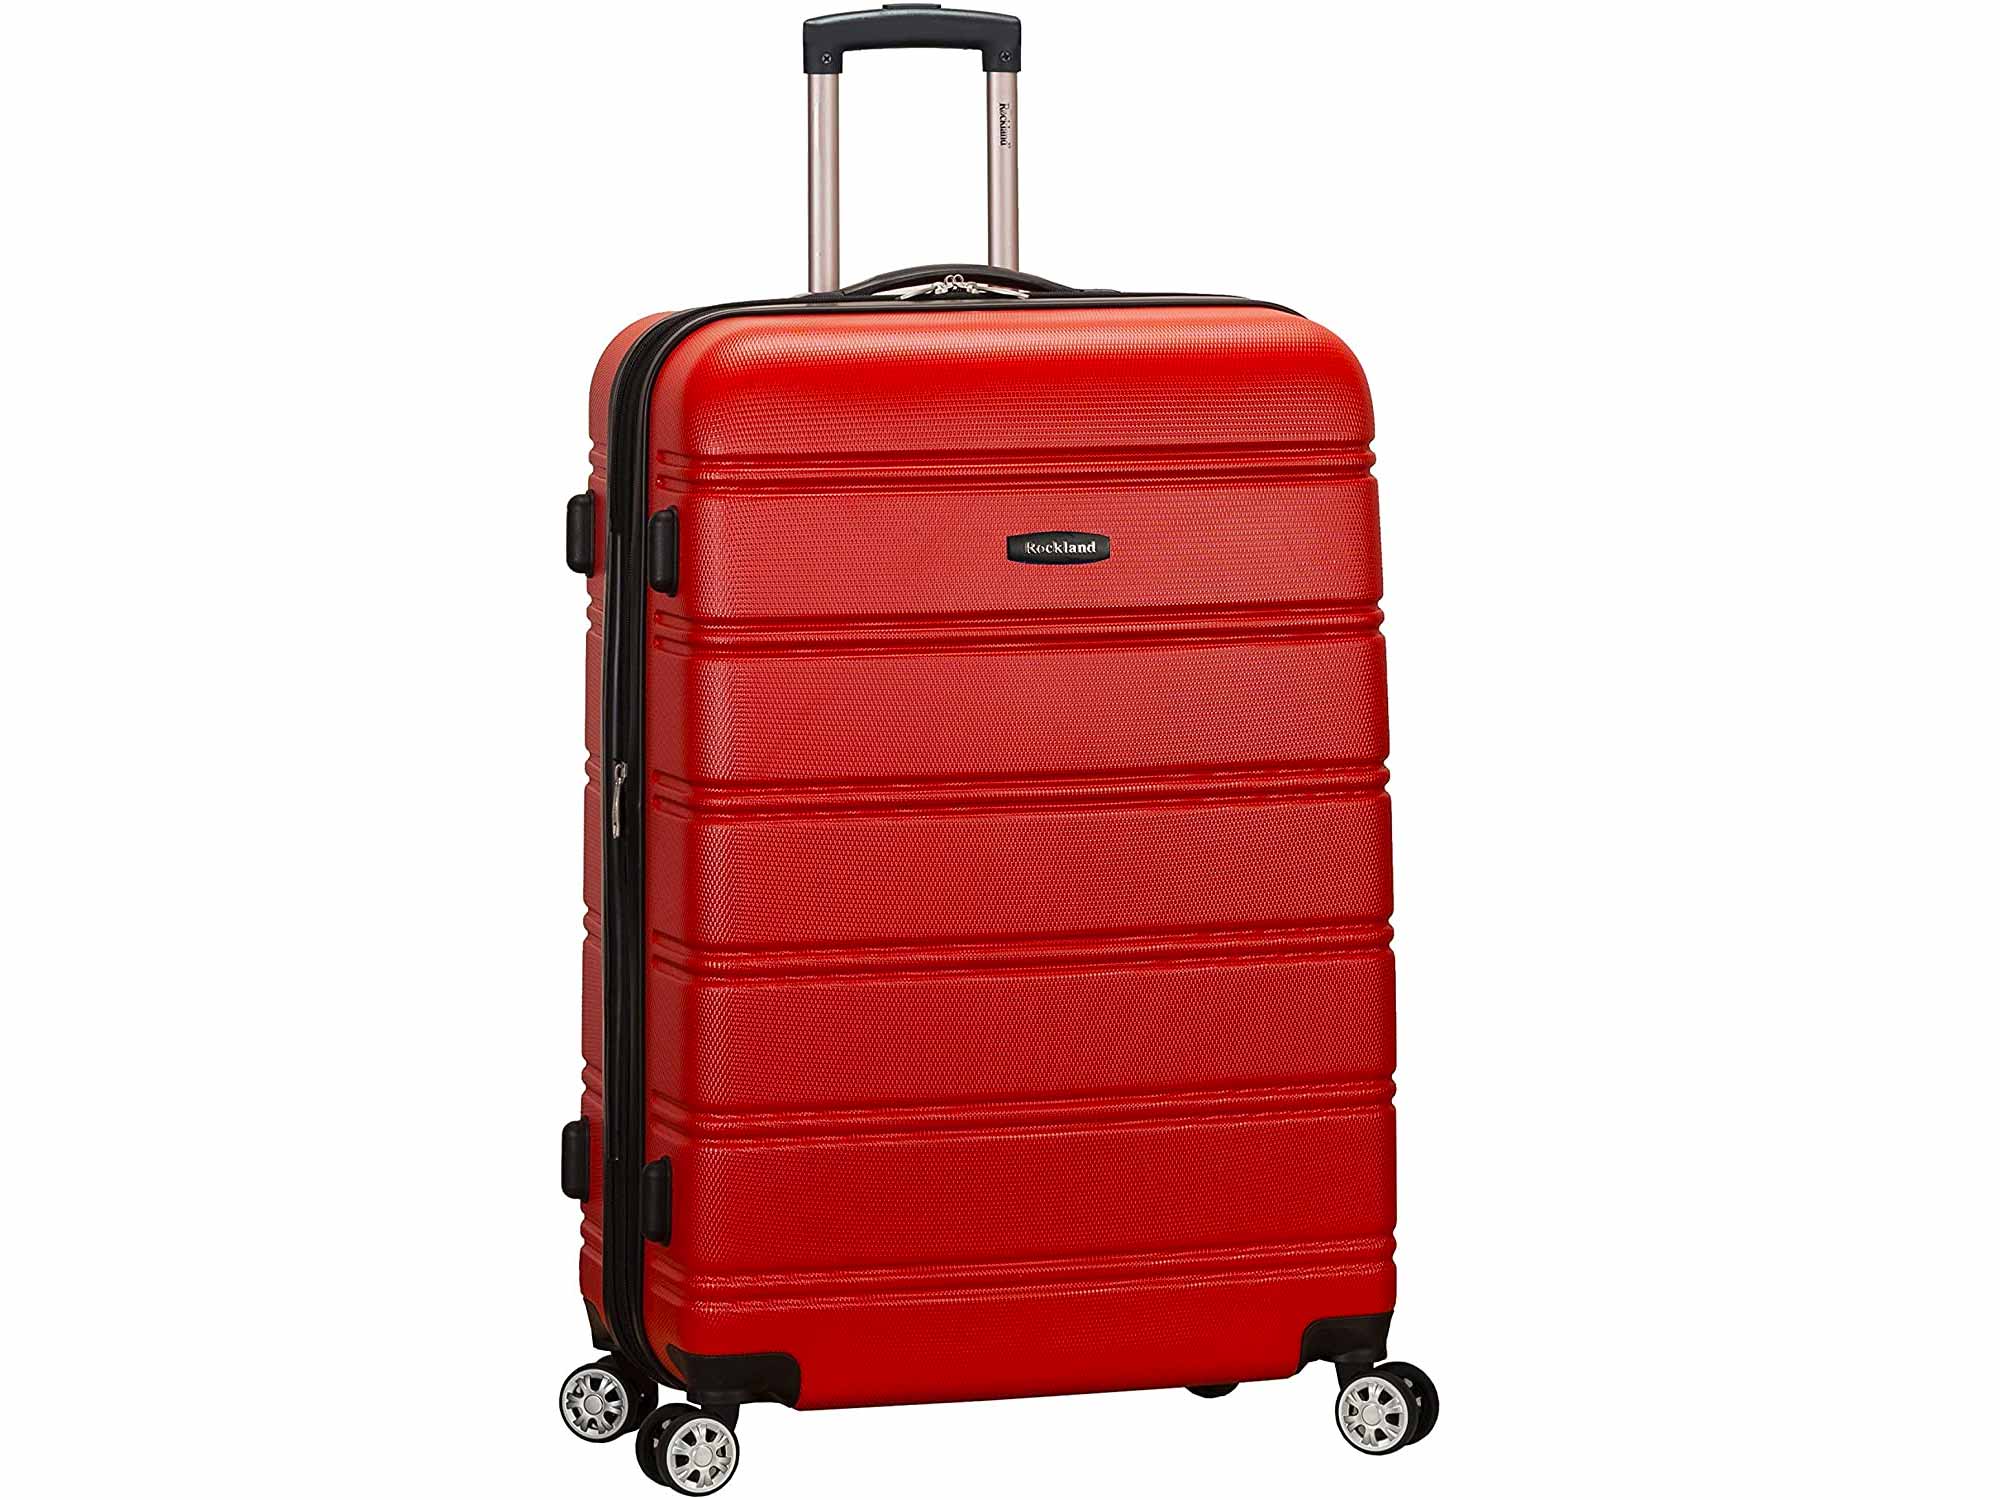 Rockland Melbourne Hardside Expandable Spinner Wheel Luggage, Red, Checked-Large 28-Inch